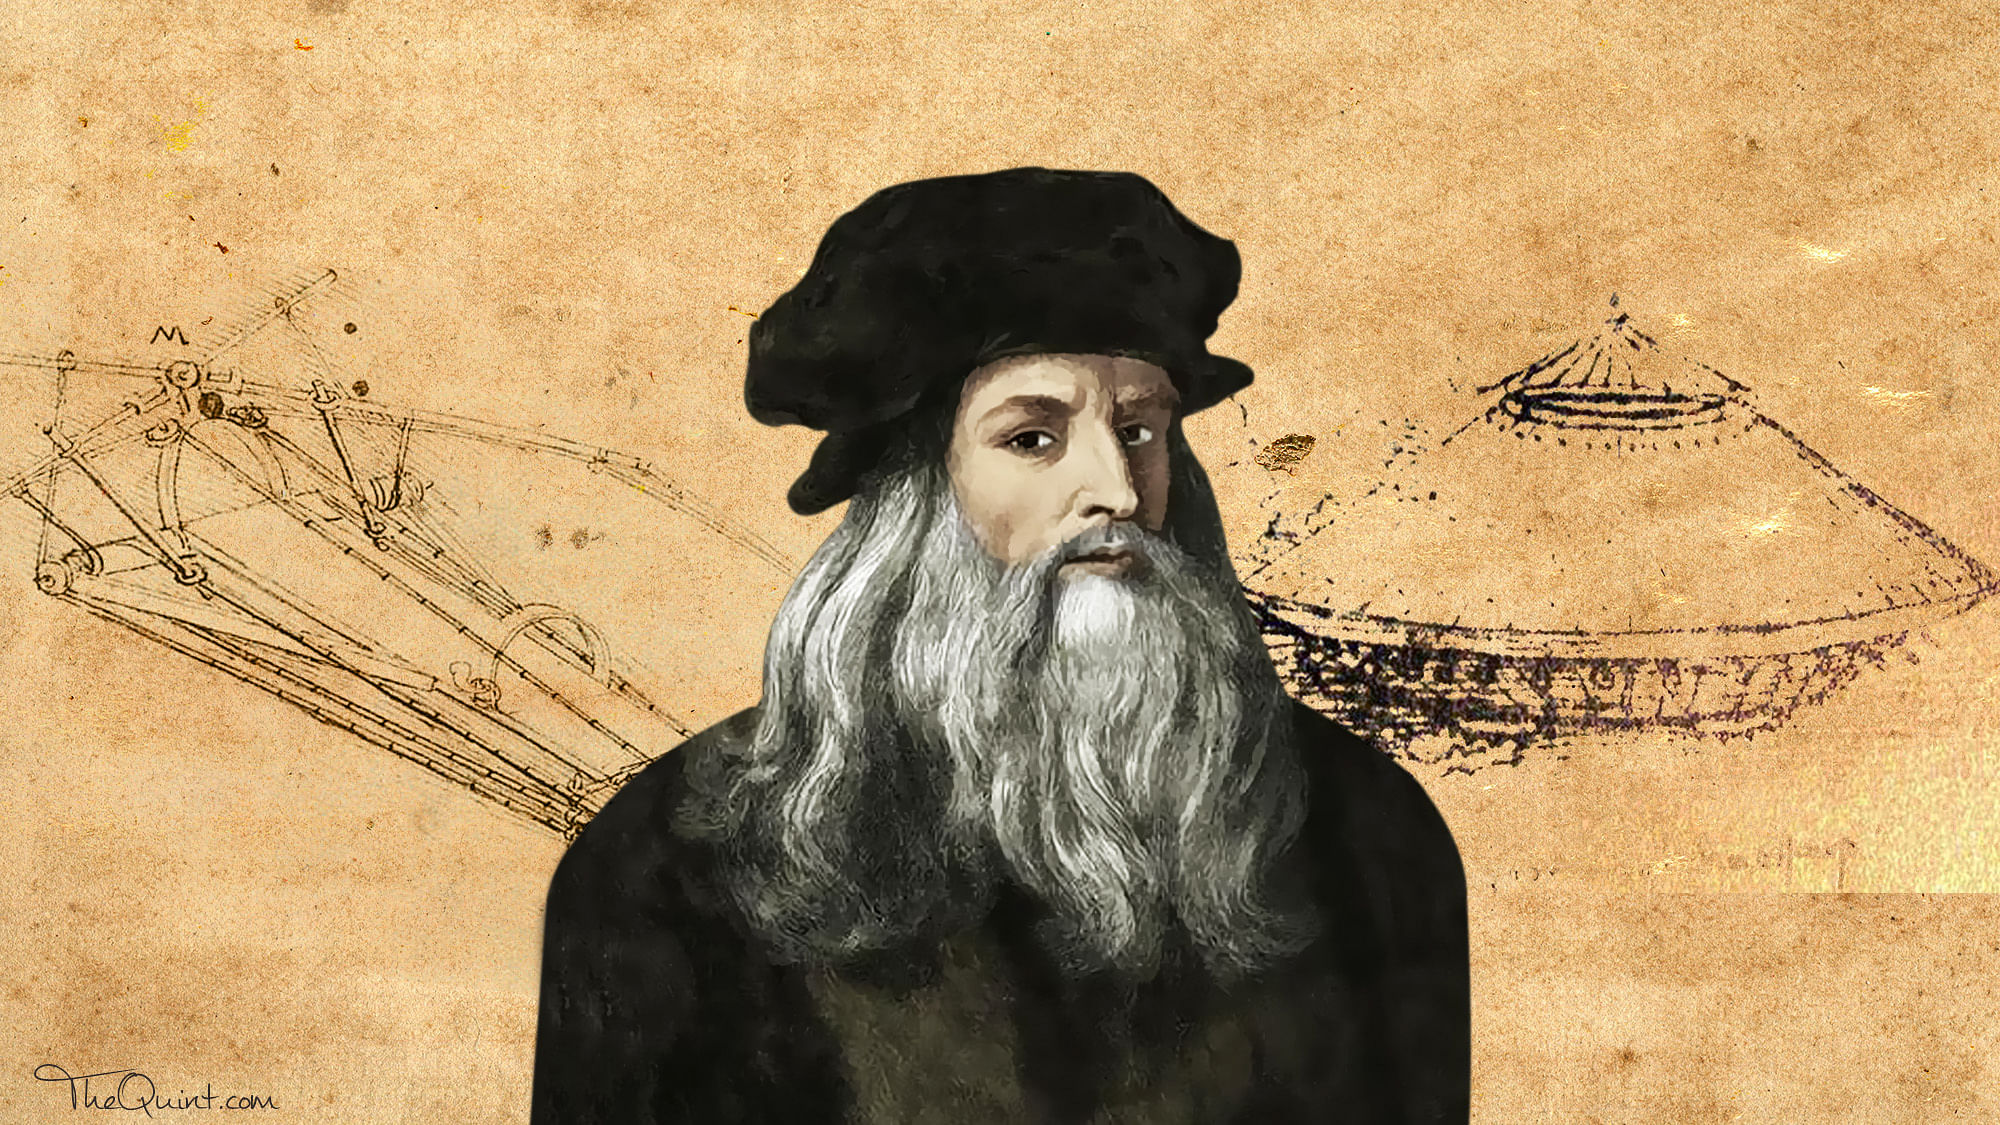 Conjuring up the helicopter and military tank, Leonardo Da Vinci was a mind ahead of his time. 